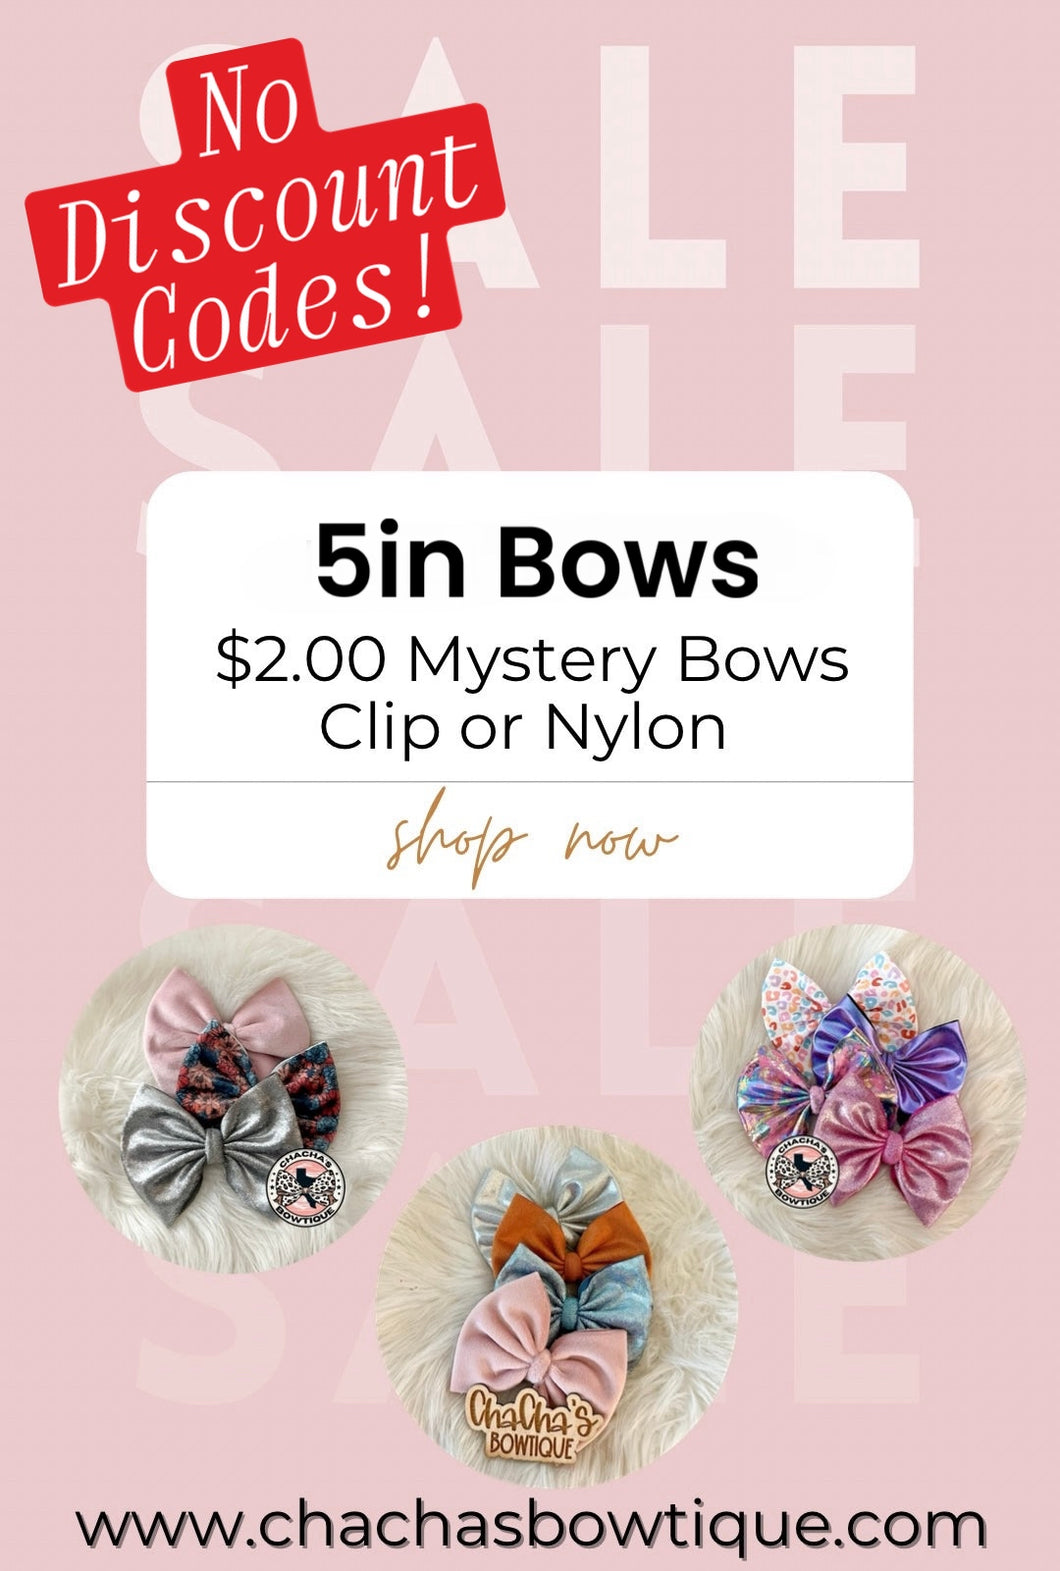 🚨NO DISCOUNT CODES🚨 $2 • 5in MYSTERY BOWS